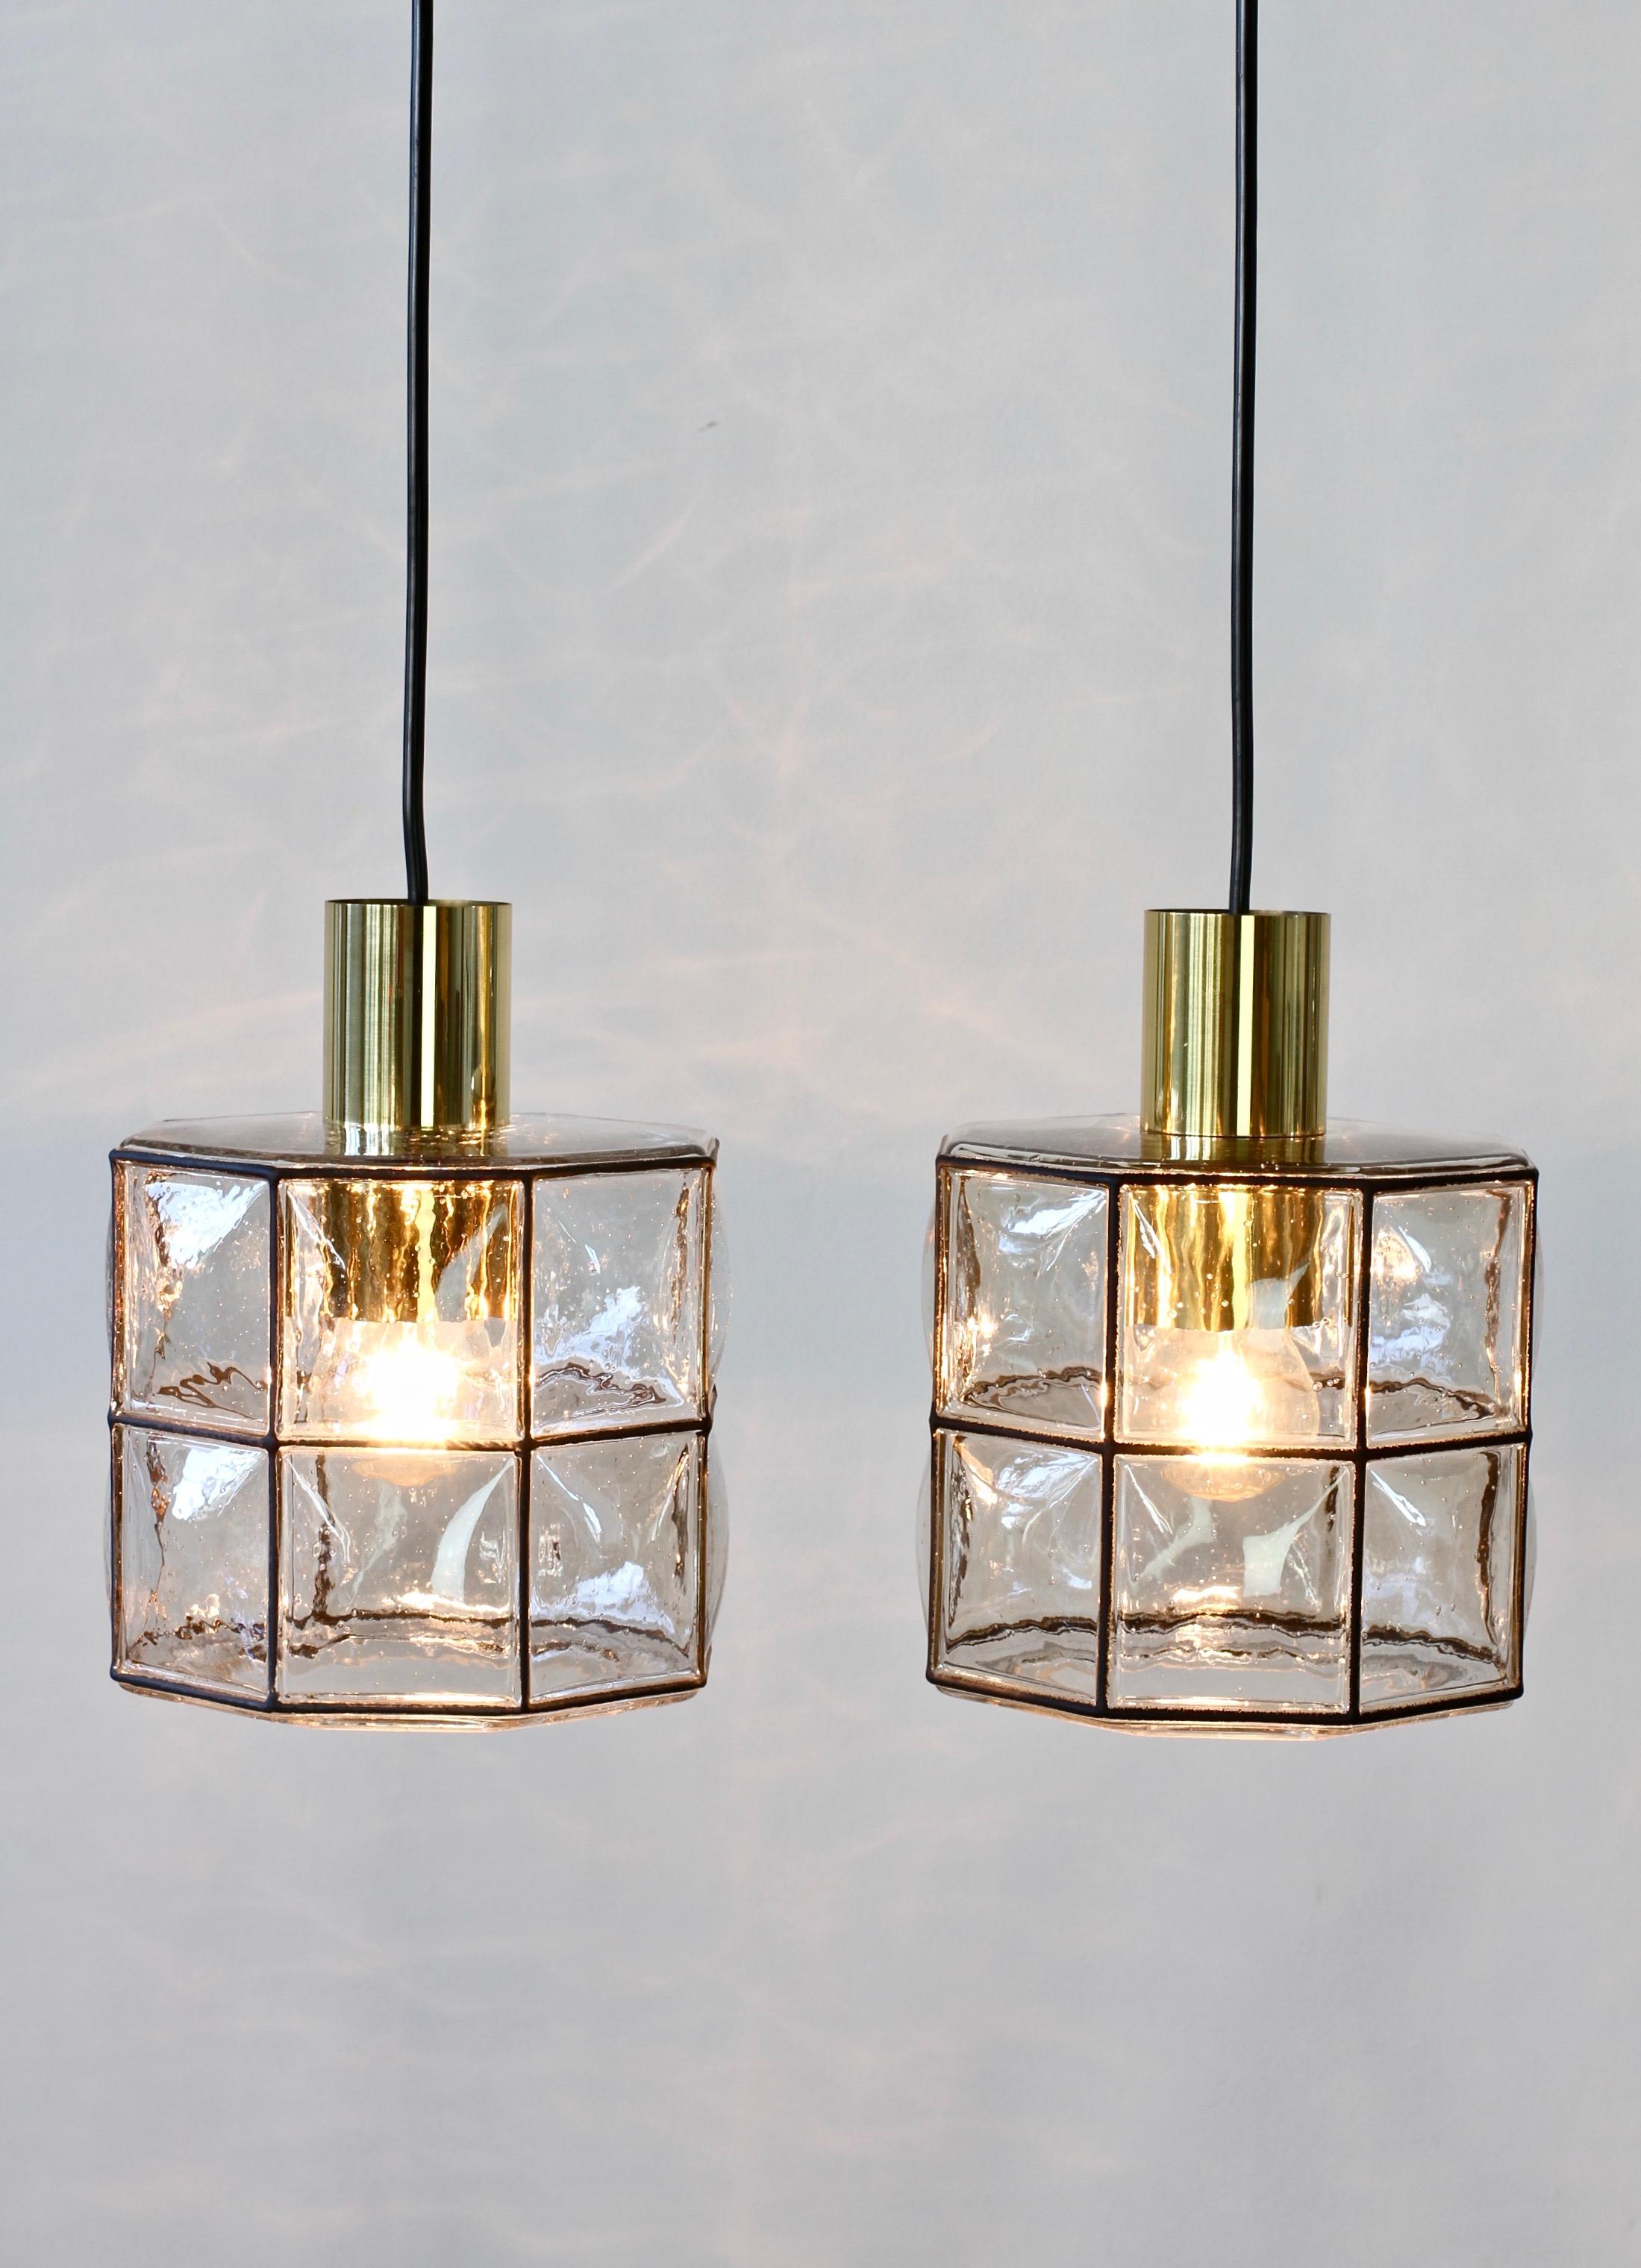 Limburg Glashutte minimal, geometric and simply shaped pendant lamp or light fixtures made in Germany, circa 1965. The Pulegoso or 'bubble' glass bulges slightly out of the black 